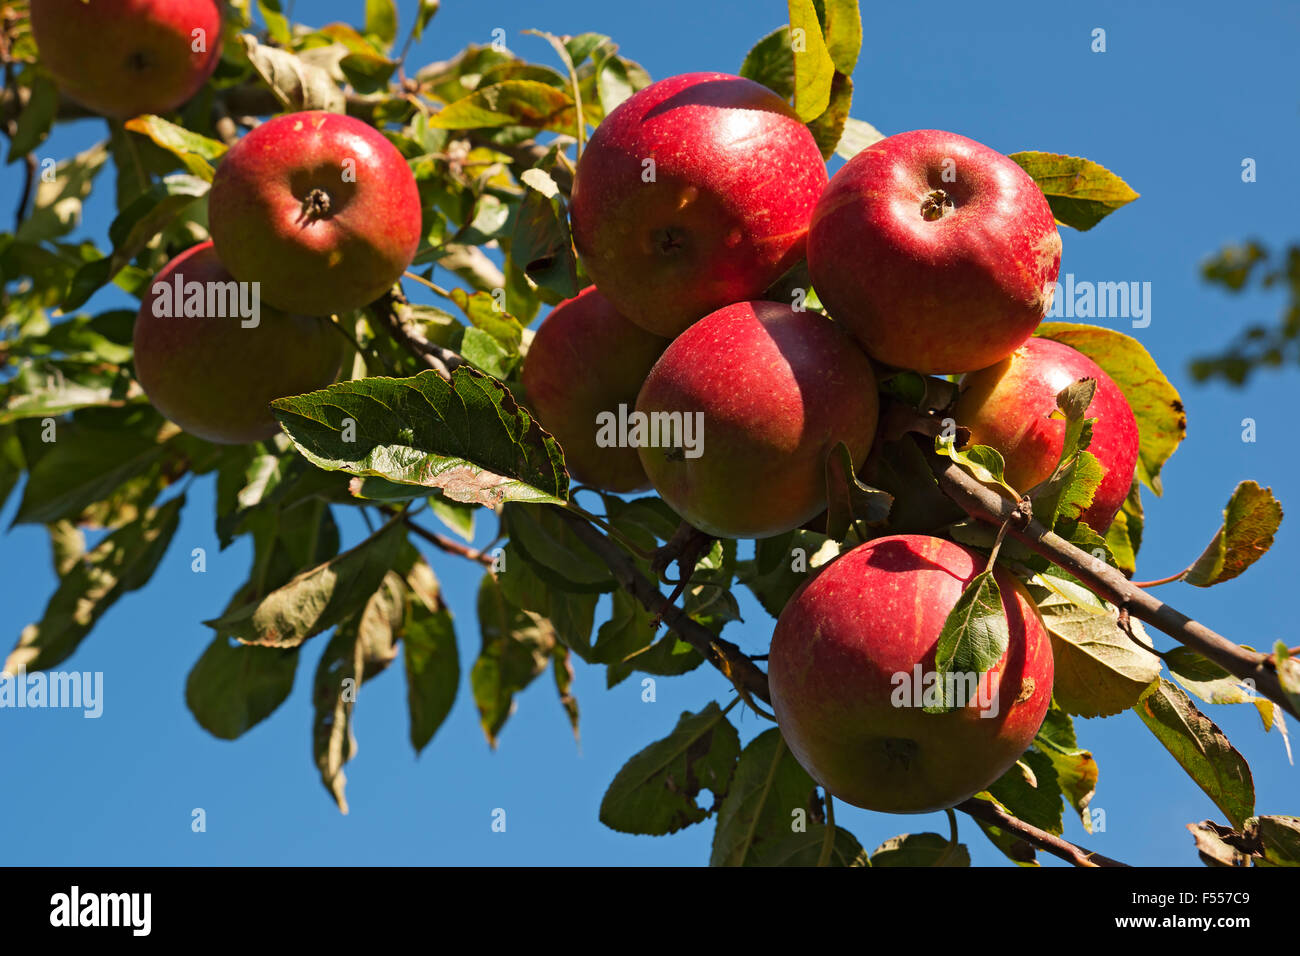 Close up of red ripe apples growing on tree apple branch fruit fruits in summer autumn England UK United Kingdom GB Great Britain Stock Photo